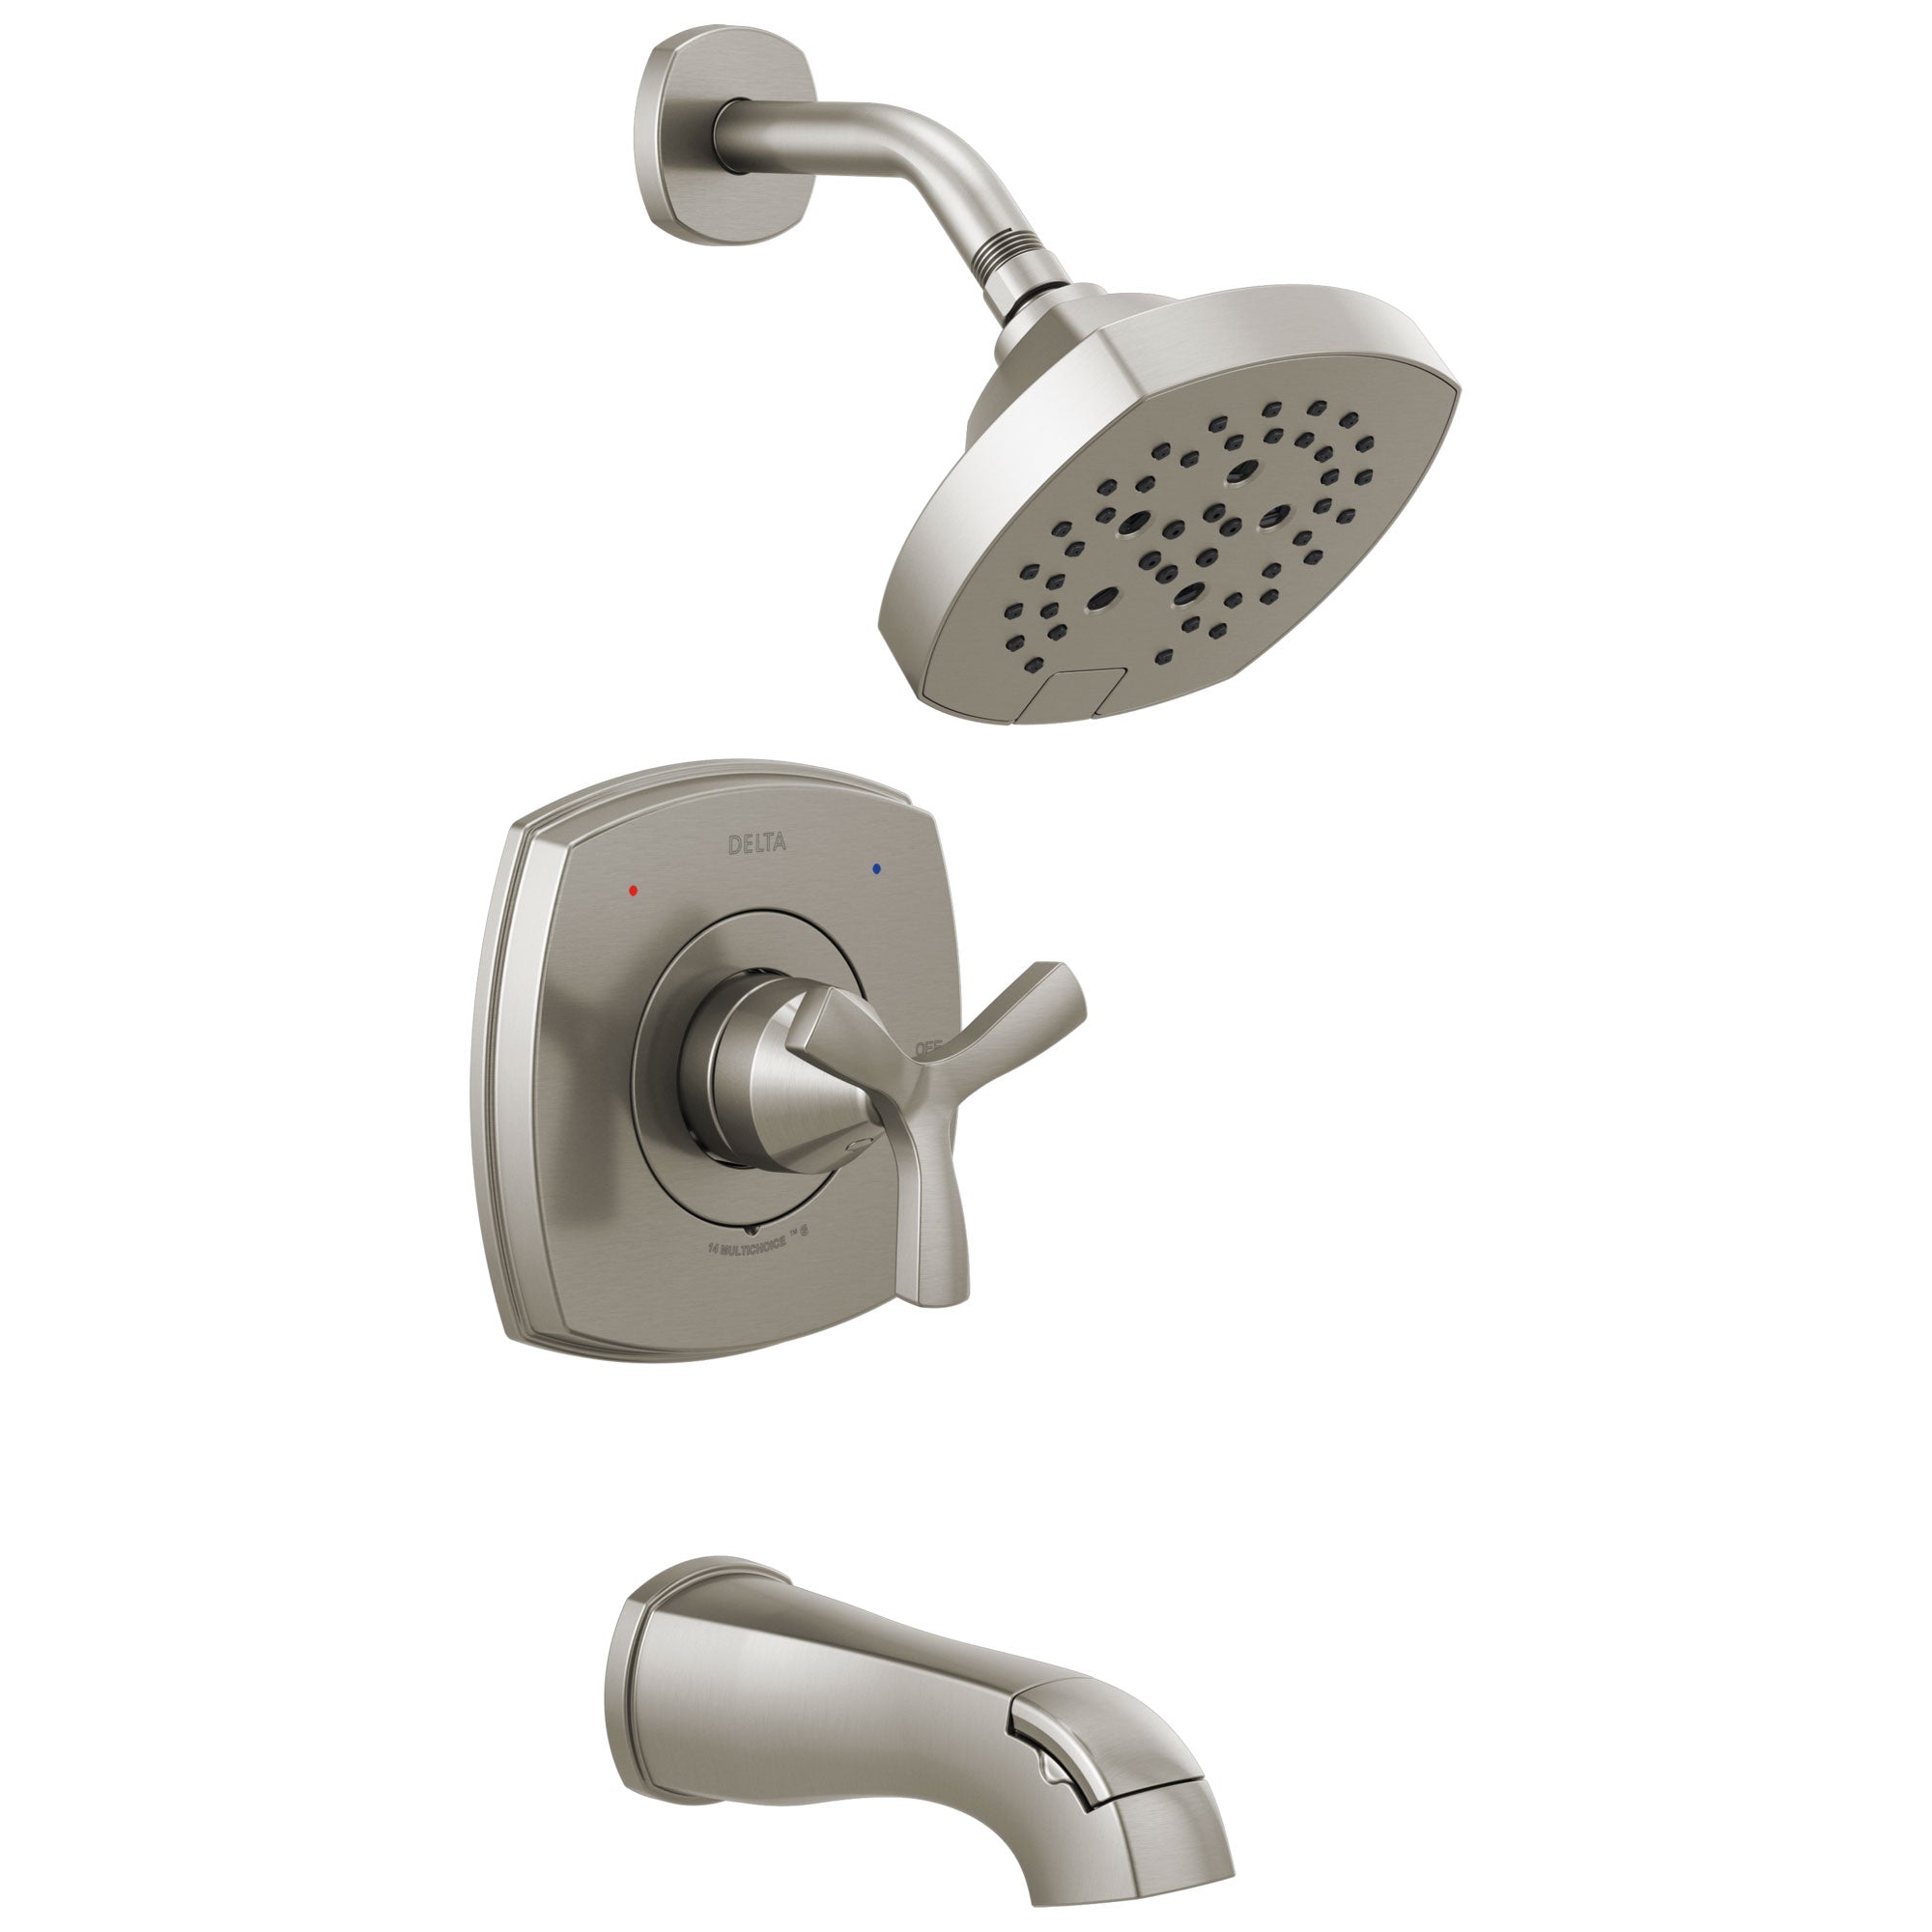 Delta Stryke Stainless Steel Finish 14 Series Tub and Shower Combination Faucet Includes Helo Cross Handle, Cartridge, and Valve without Stops D3435V